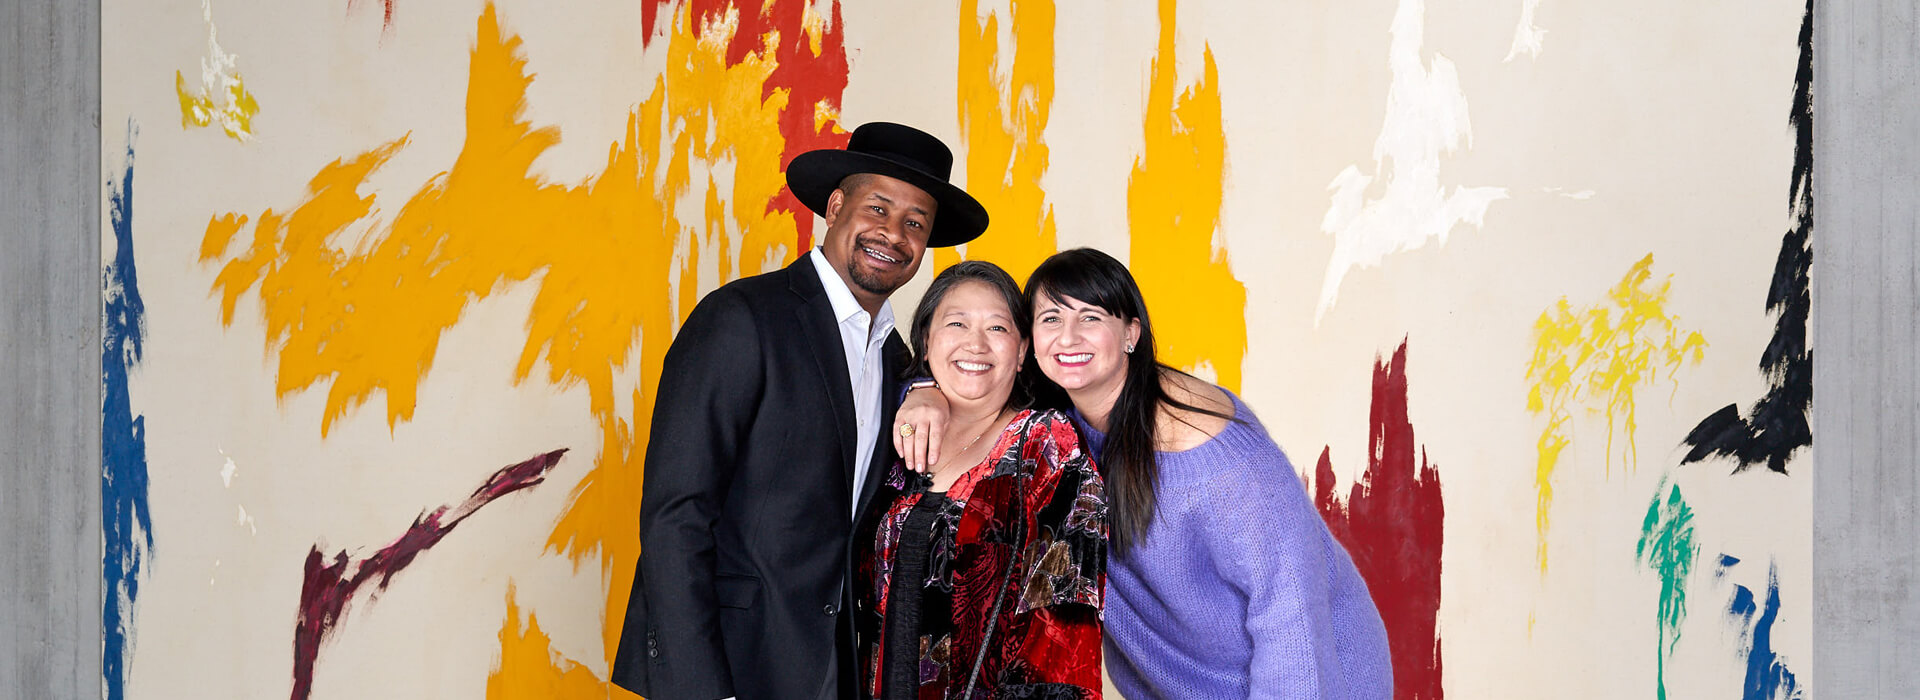 Two women and a man wearing a hat pose in front of a large colorful abstract painting